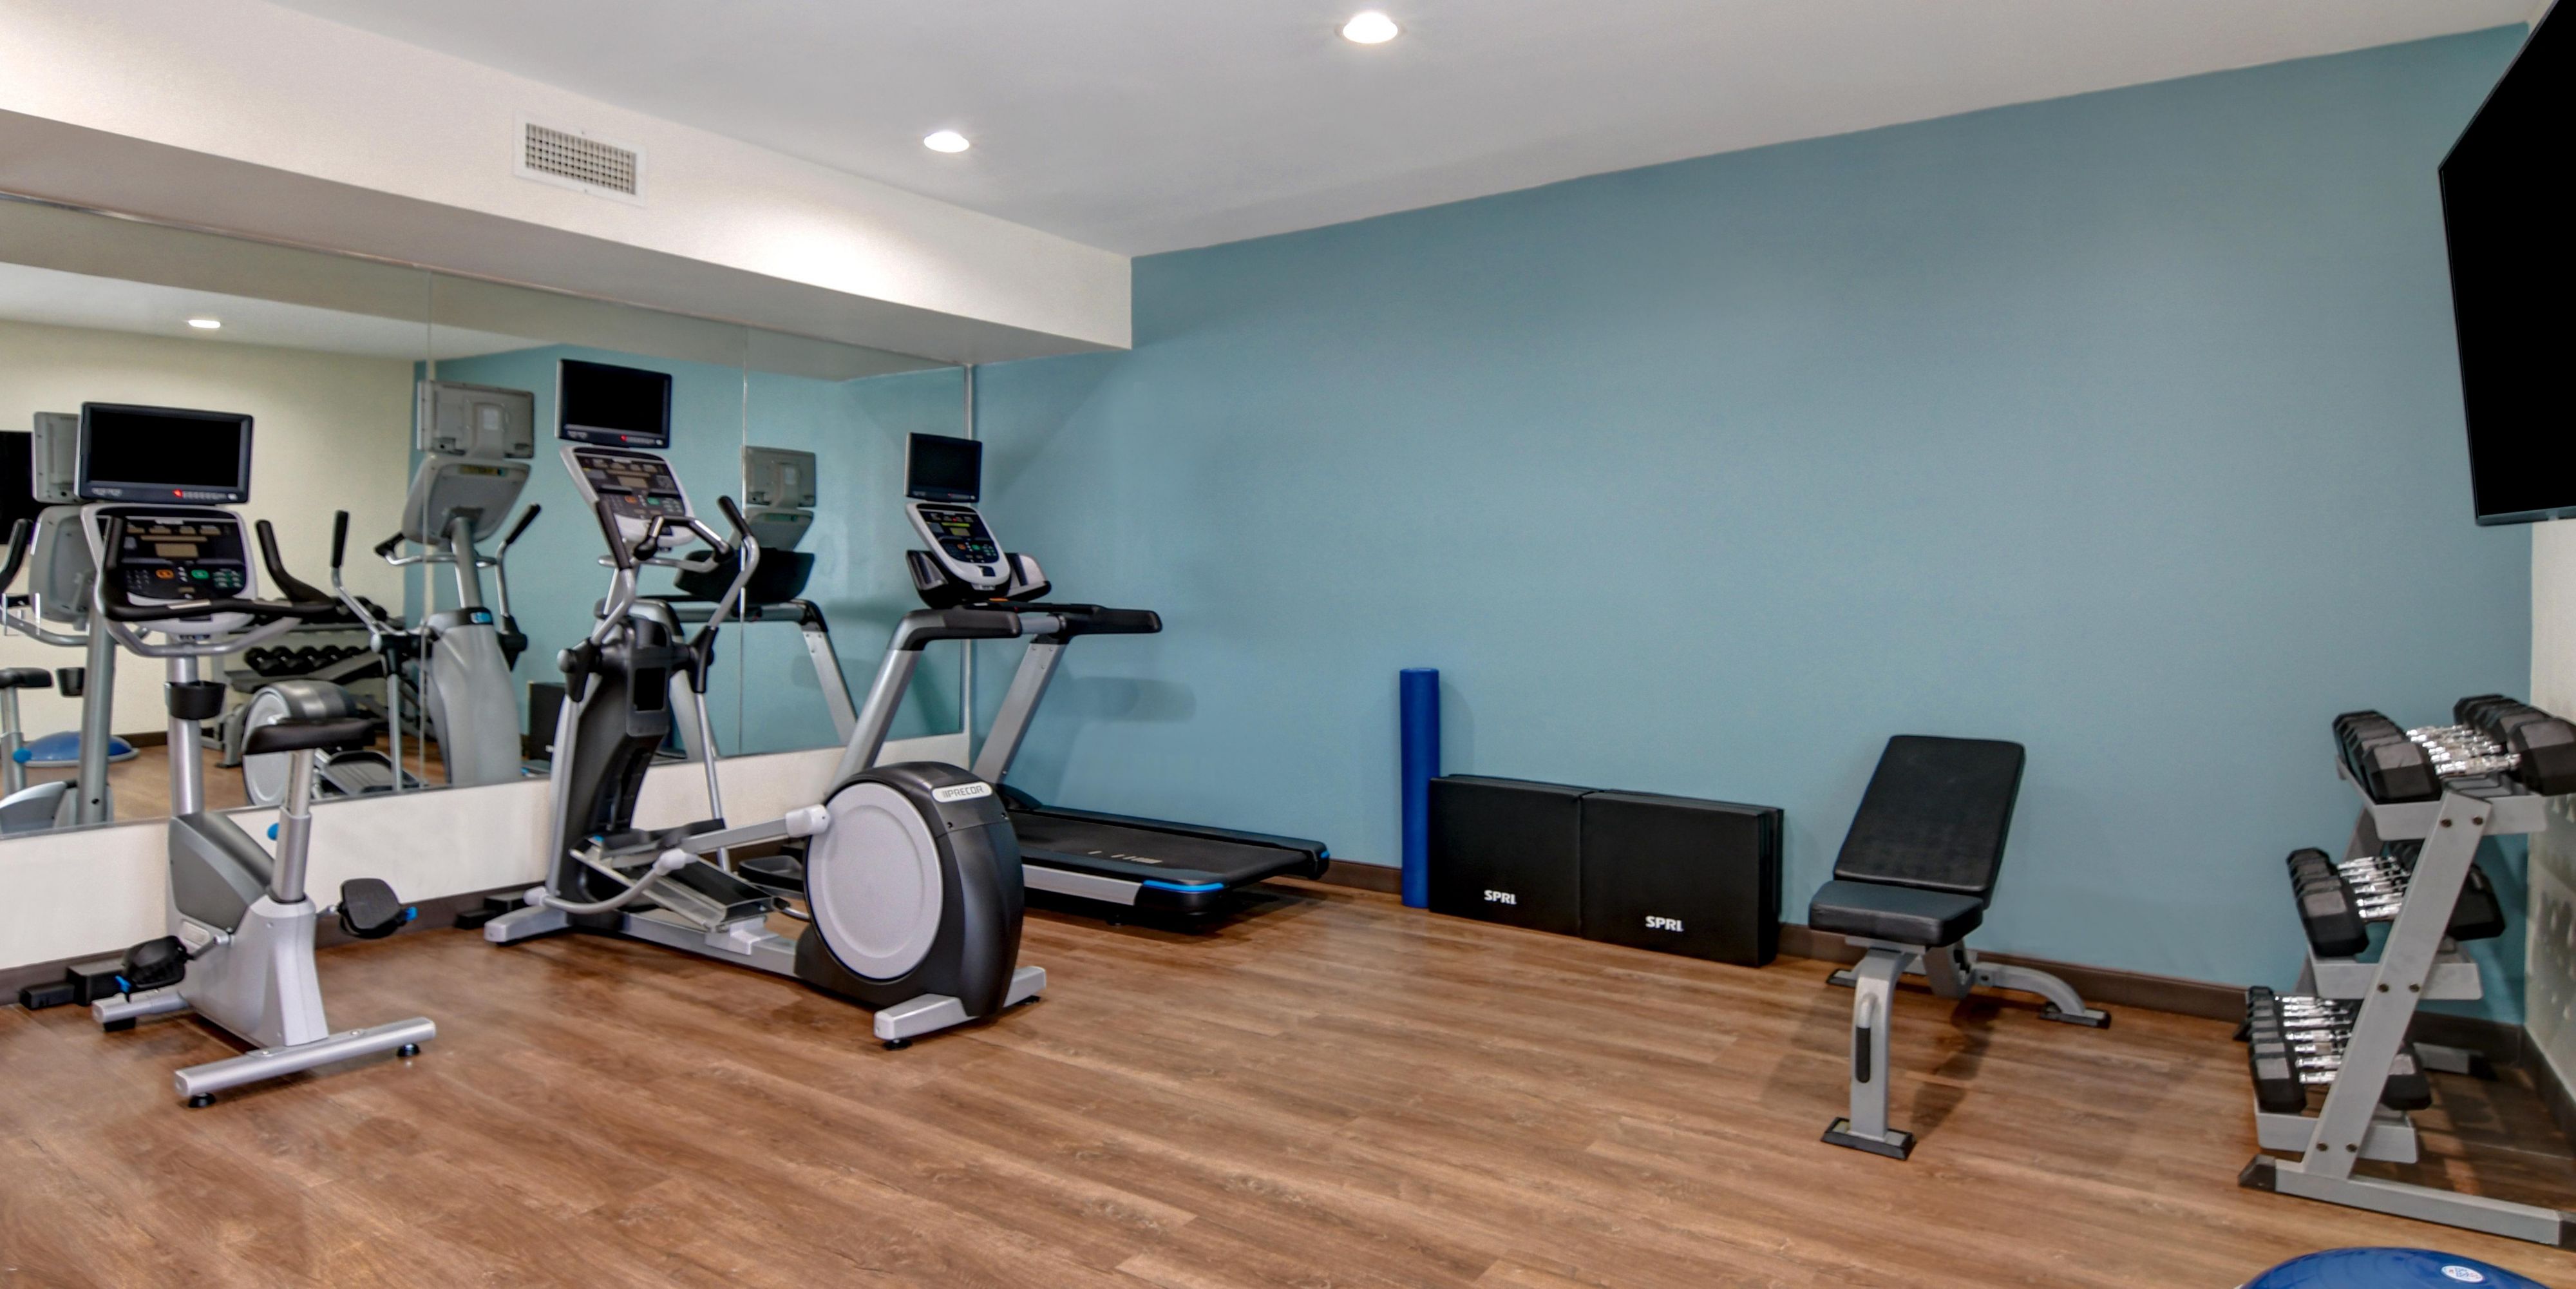 Our on-site fitness center offers a variety of cardio machines and free weights.  We make it easy to keep up with our fitness routine while you are traveling.  